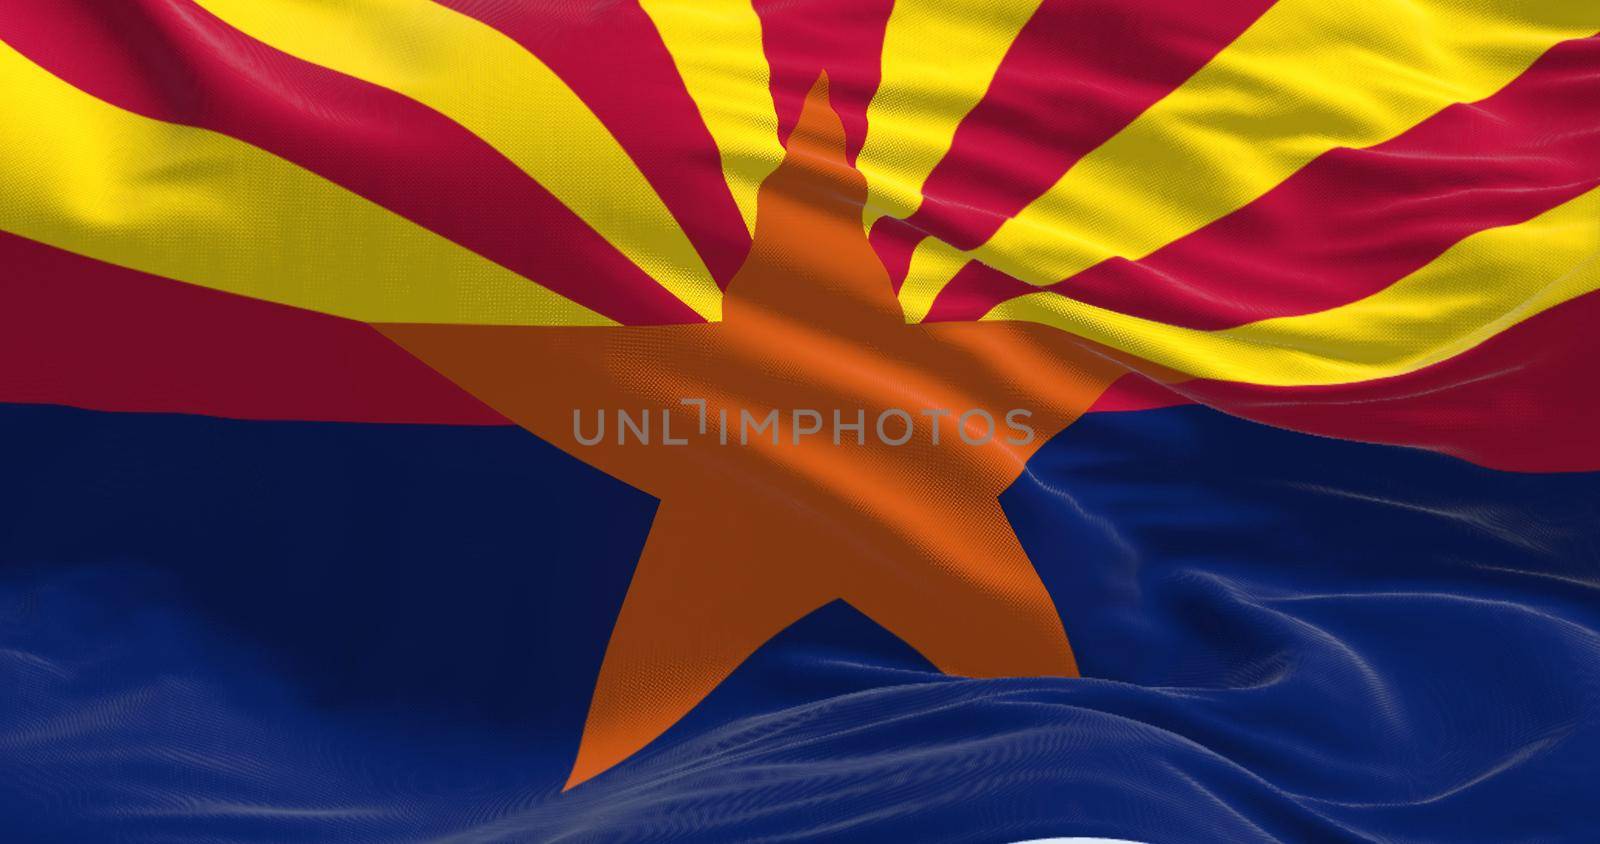 Close-up view of the Arizona state flag waving in the wind by rarrarorro